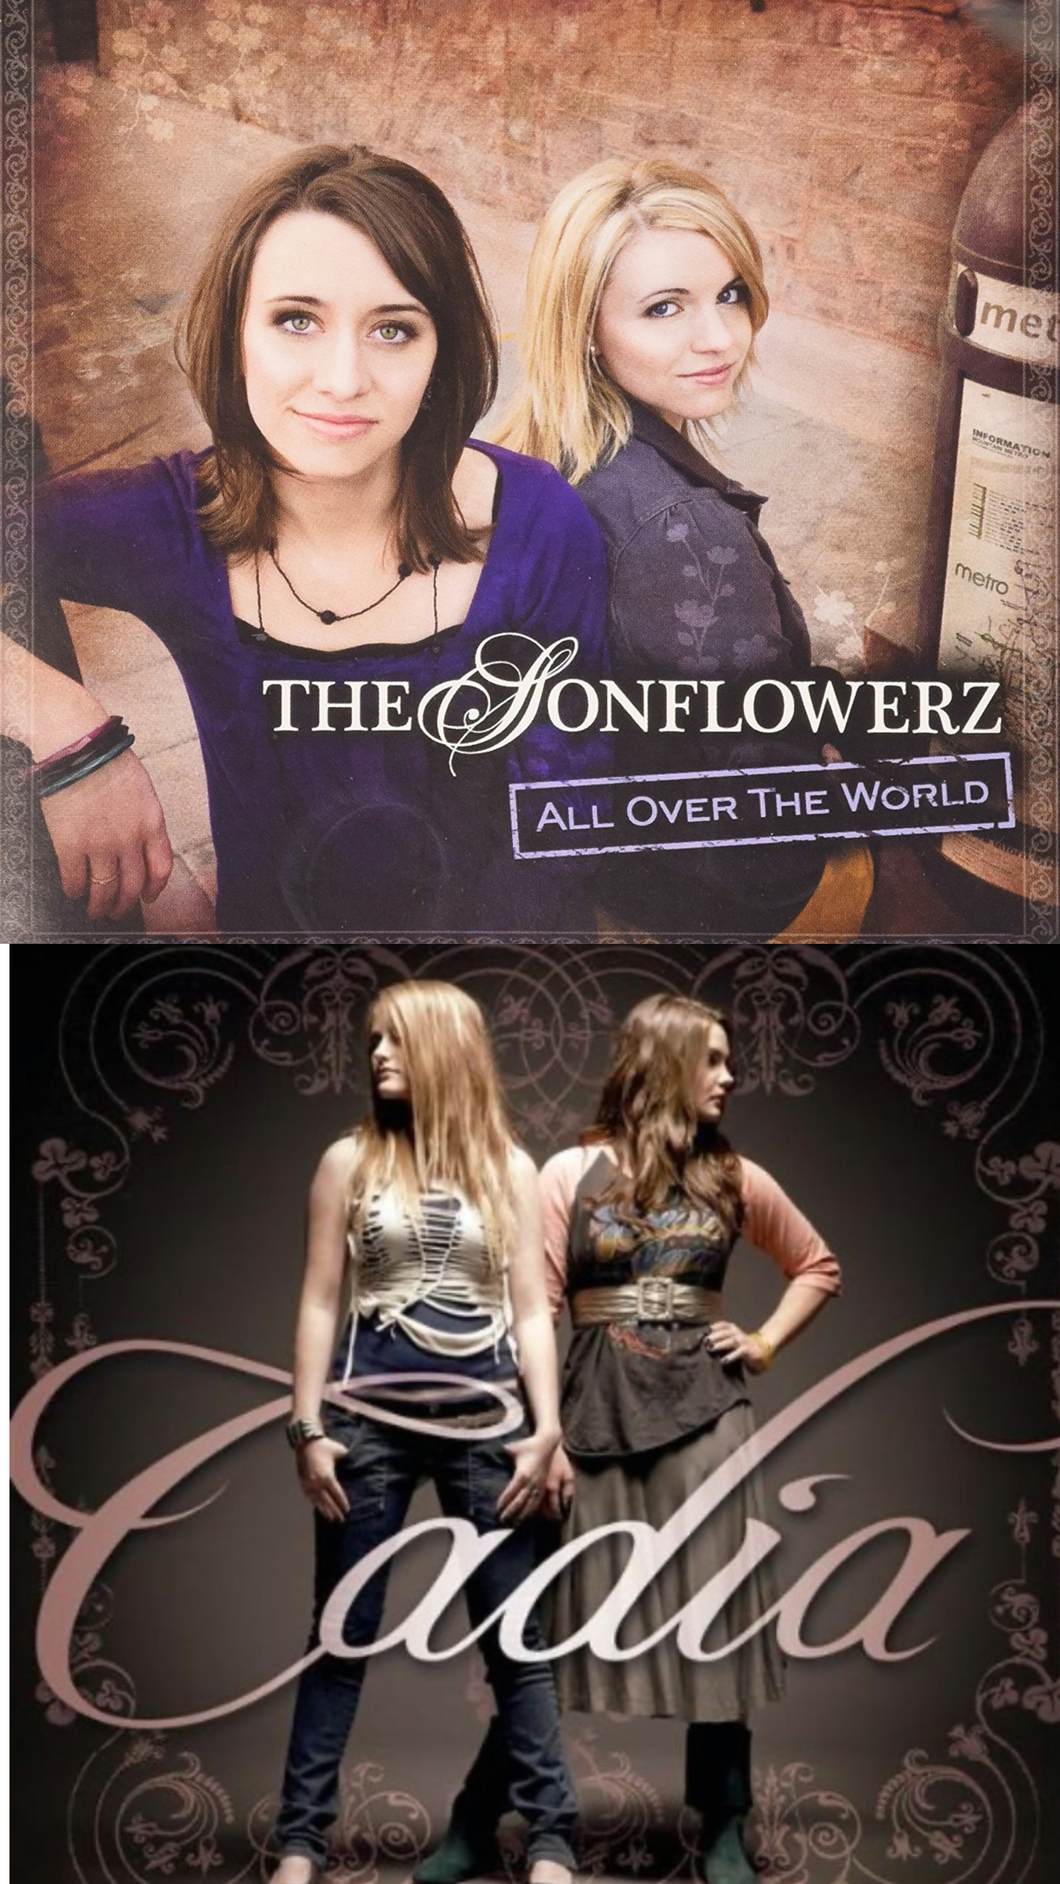 The Sonflowerz All Over the World + Cadia Deluxe 2CD/DVD